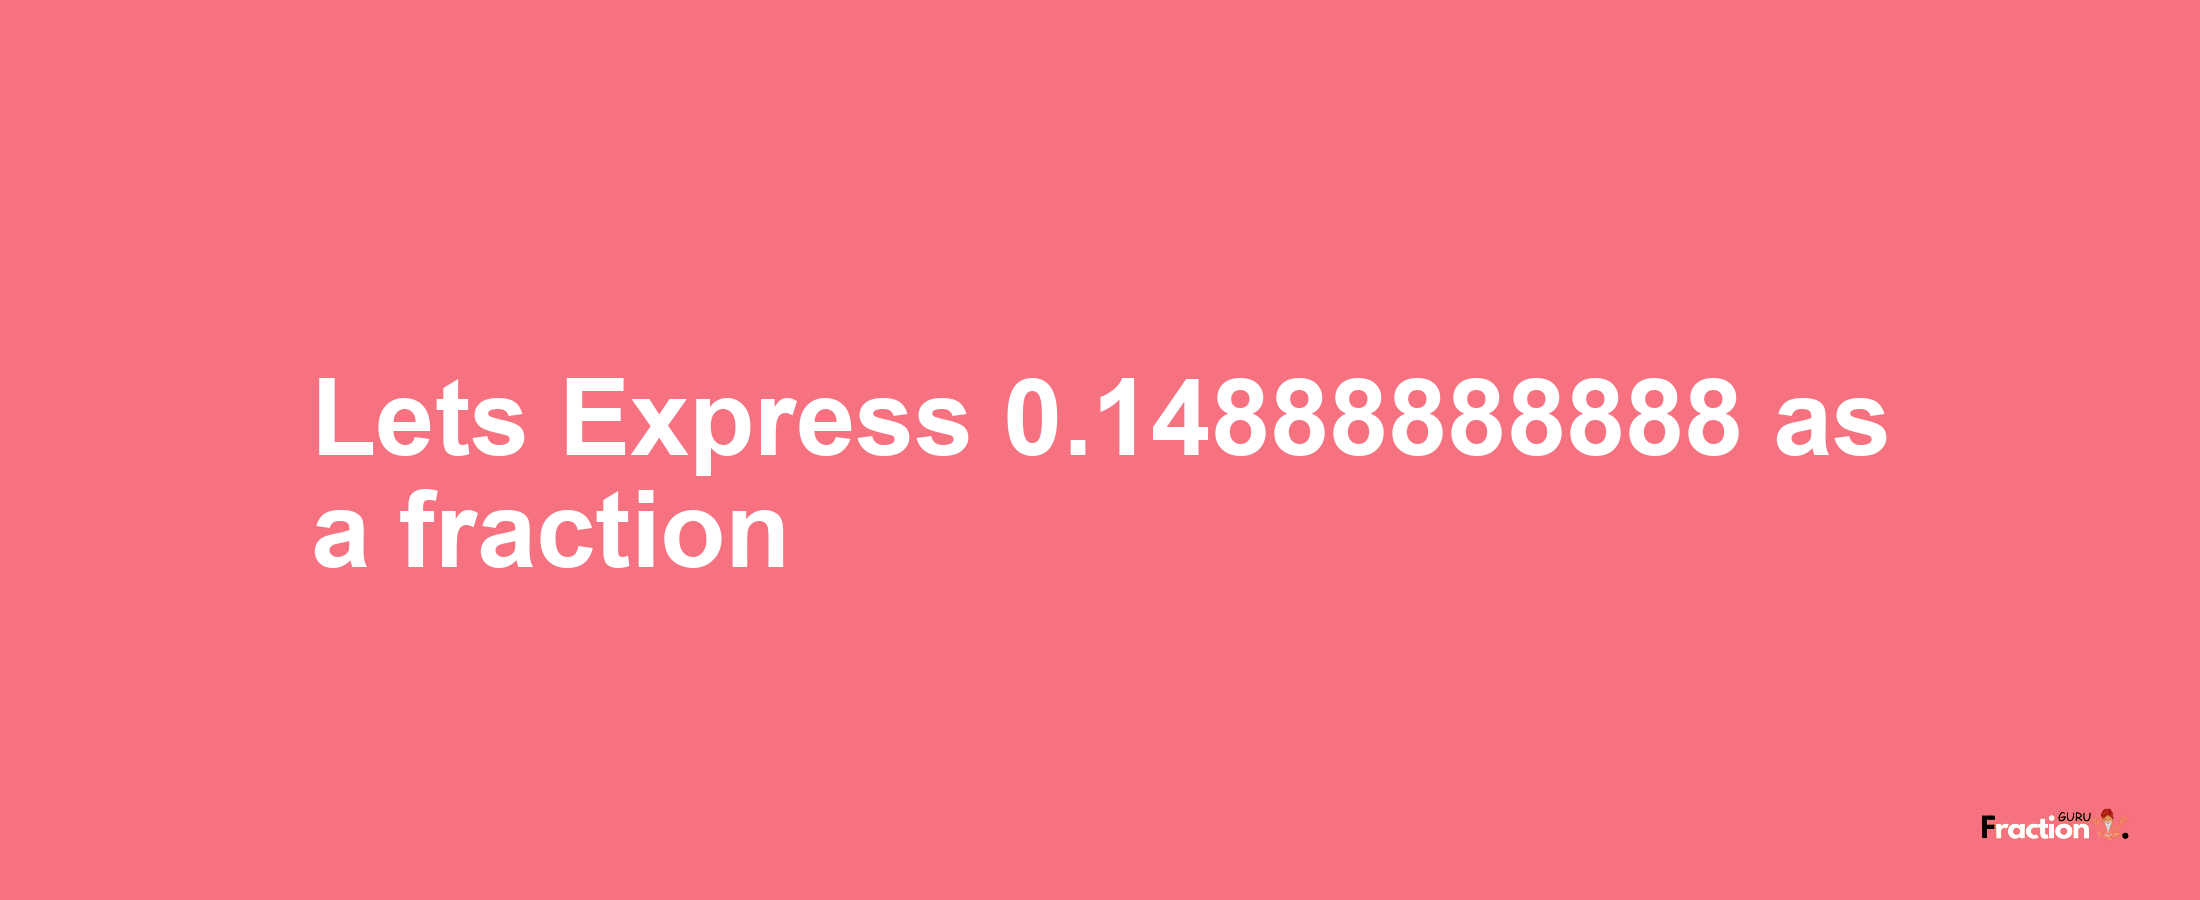 Lets Express 0.14888888888 as afraction